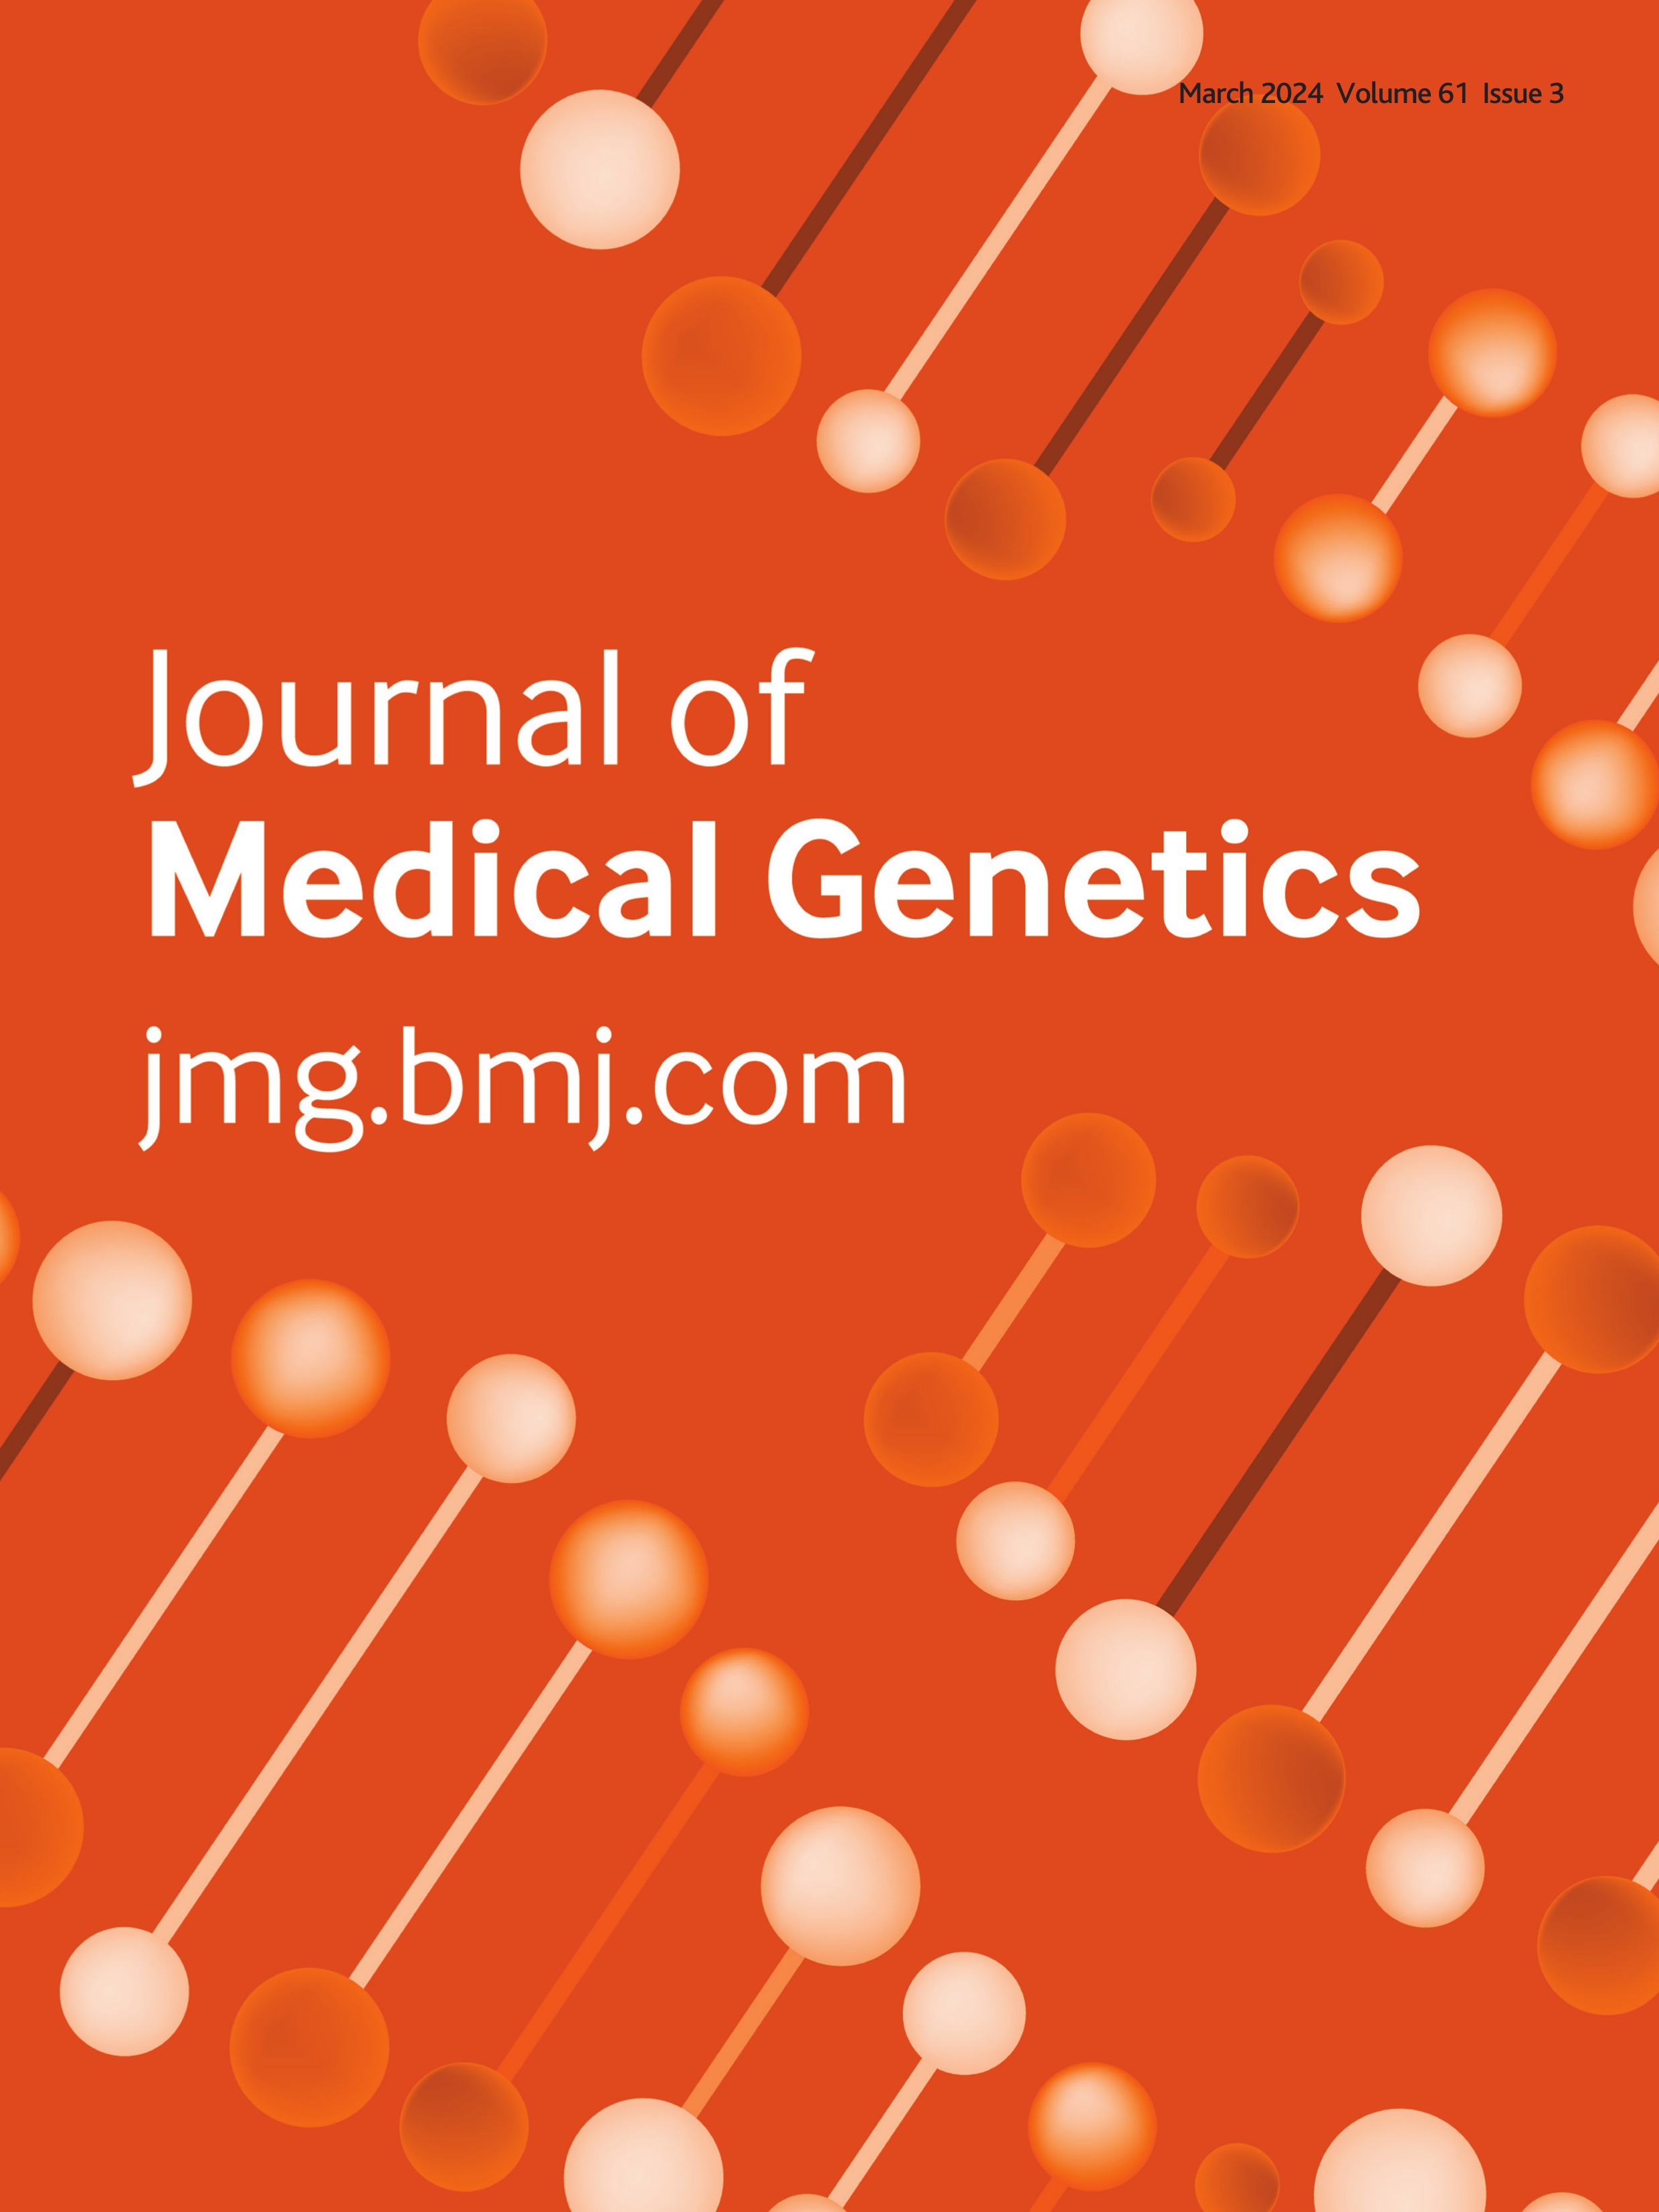 Intellectual disability syndrome associated with a homozygous founder variant in SGSM3 in Ashkenazi Jews